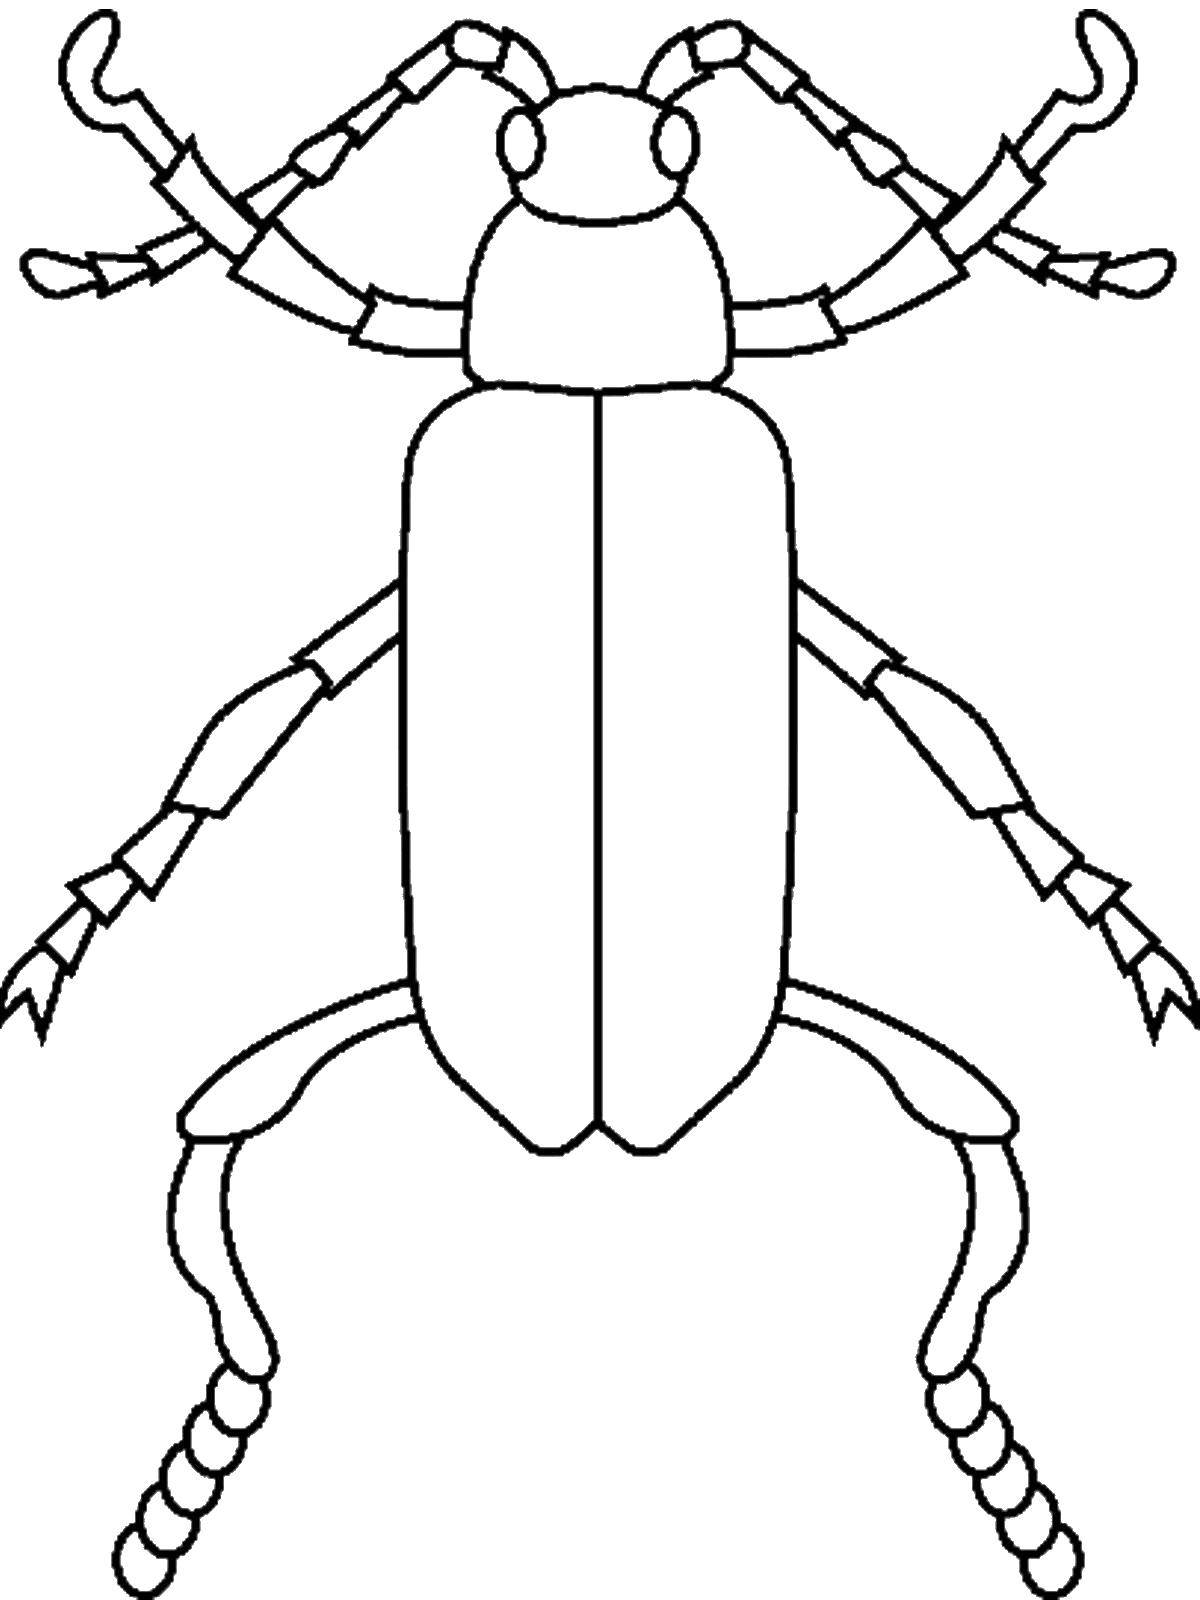 Coloring Beetle. Category insects. Tags:  beetle.